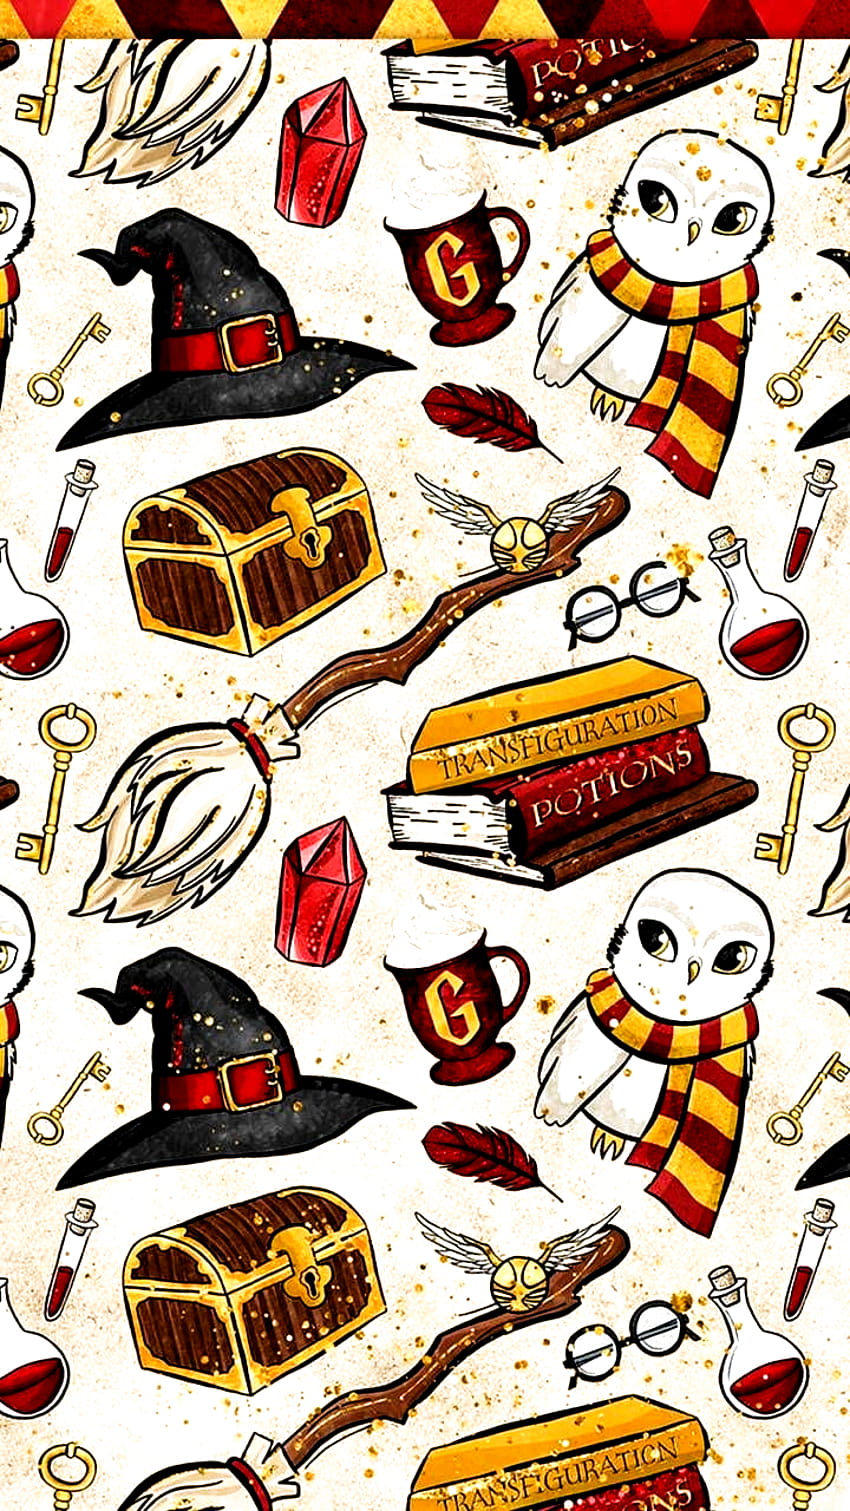 GRYFFINDOR wallpaper by jedits  Download on ZEDGE  9f4a